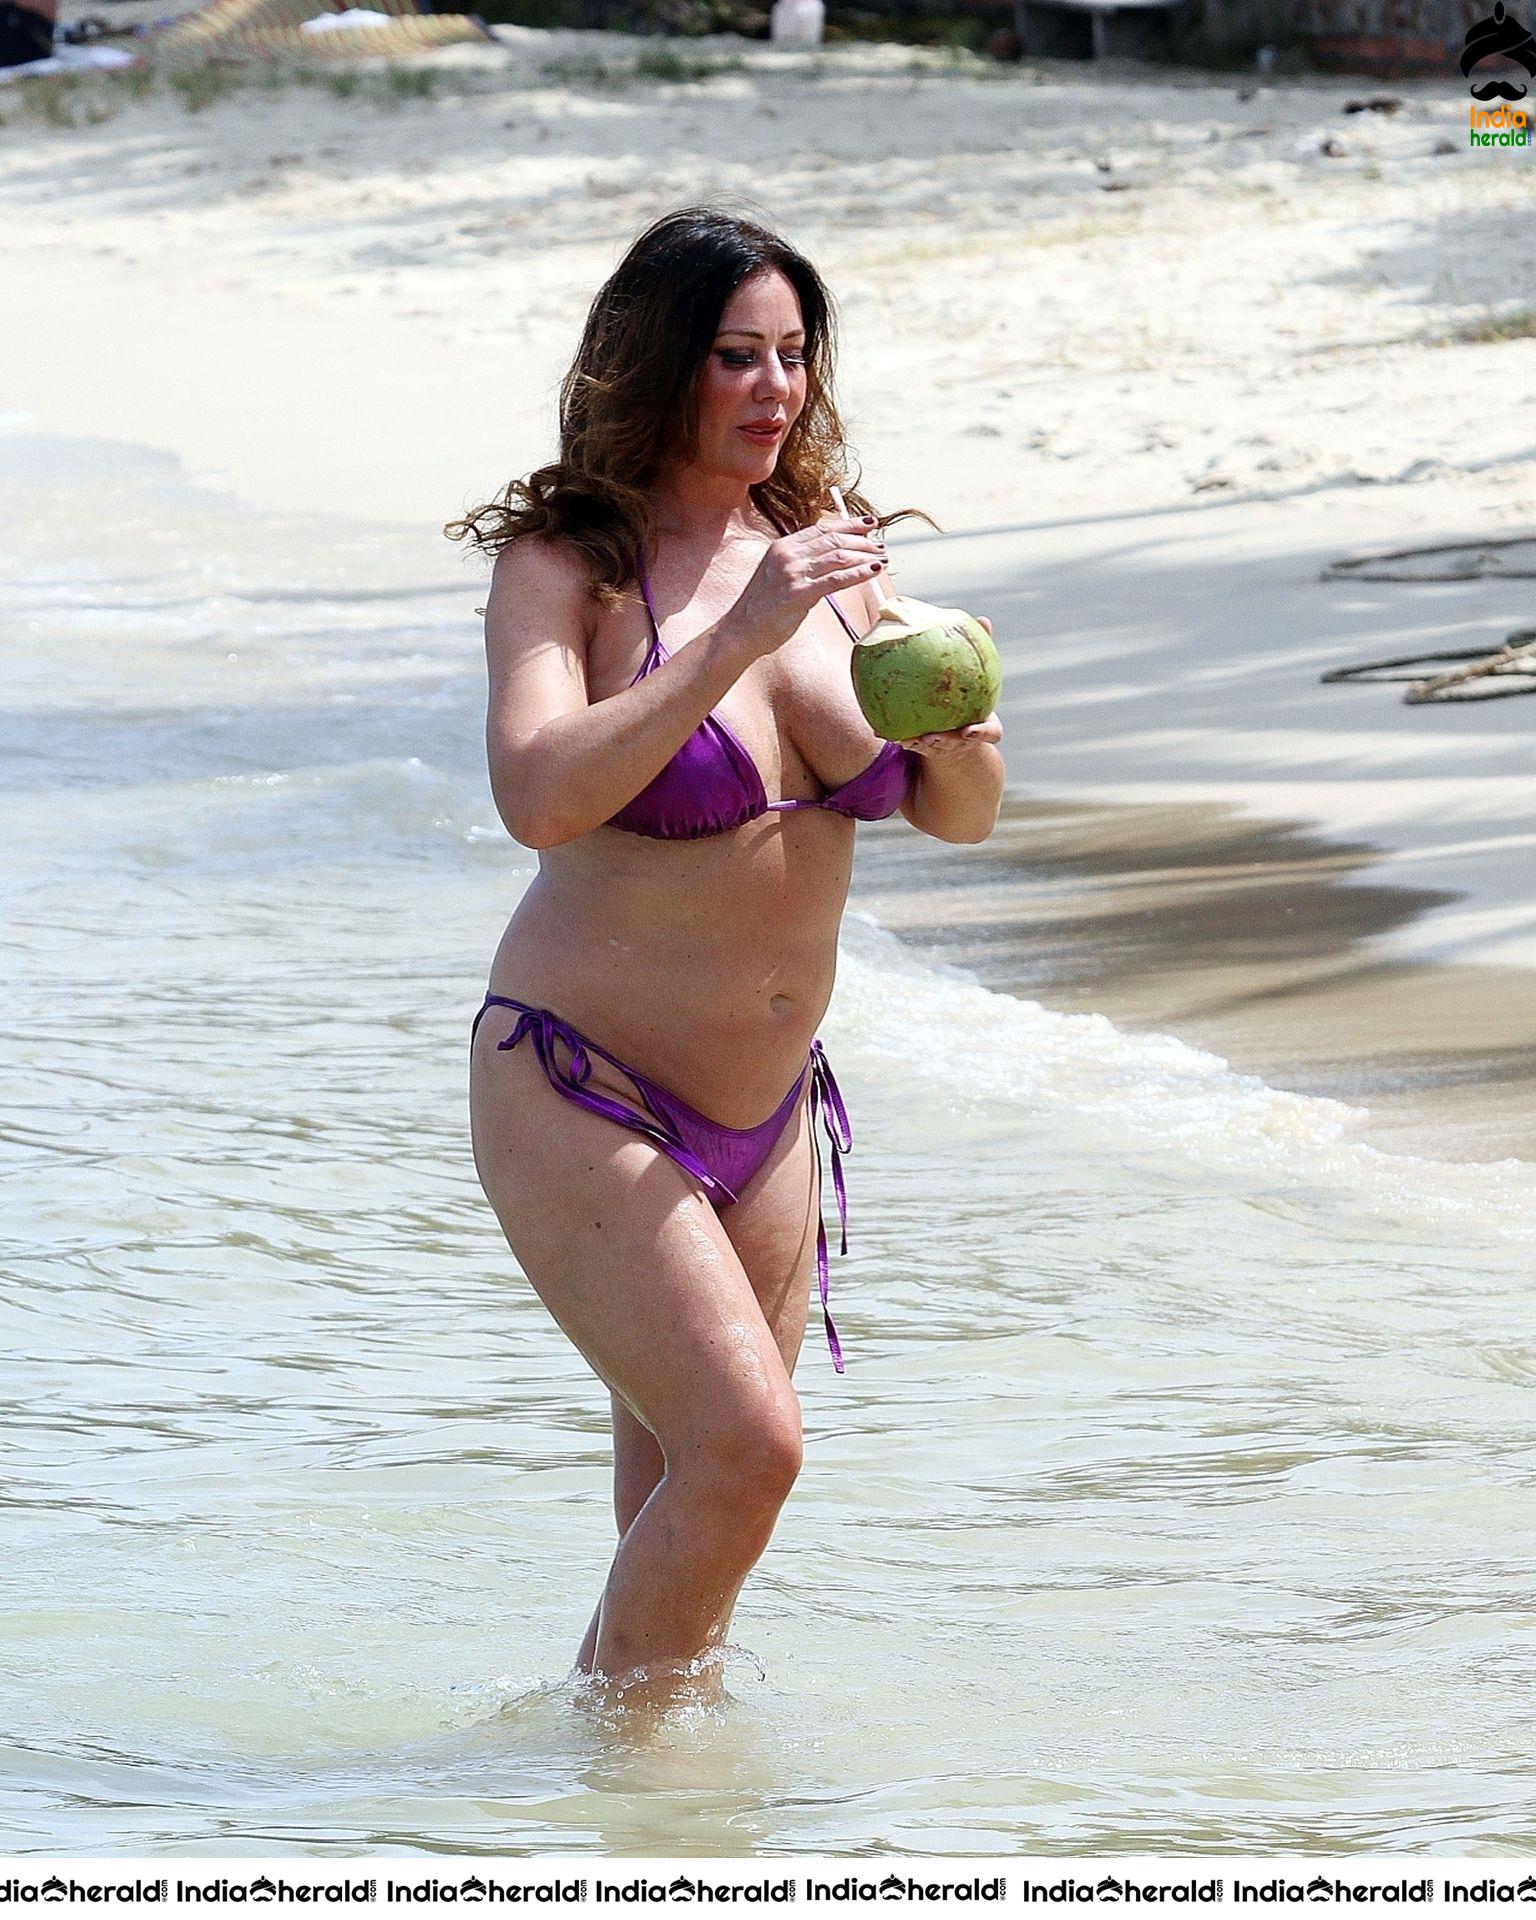 Lisa Appleton in a shiny purple bikini while on holiday in Thailand